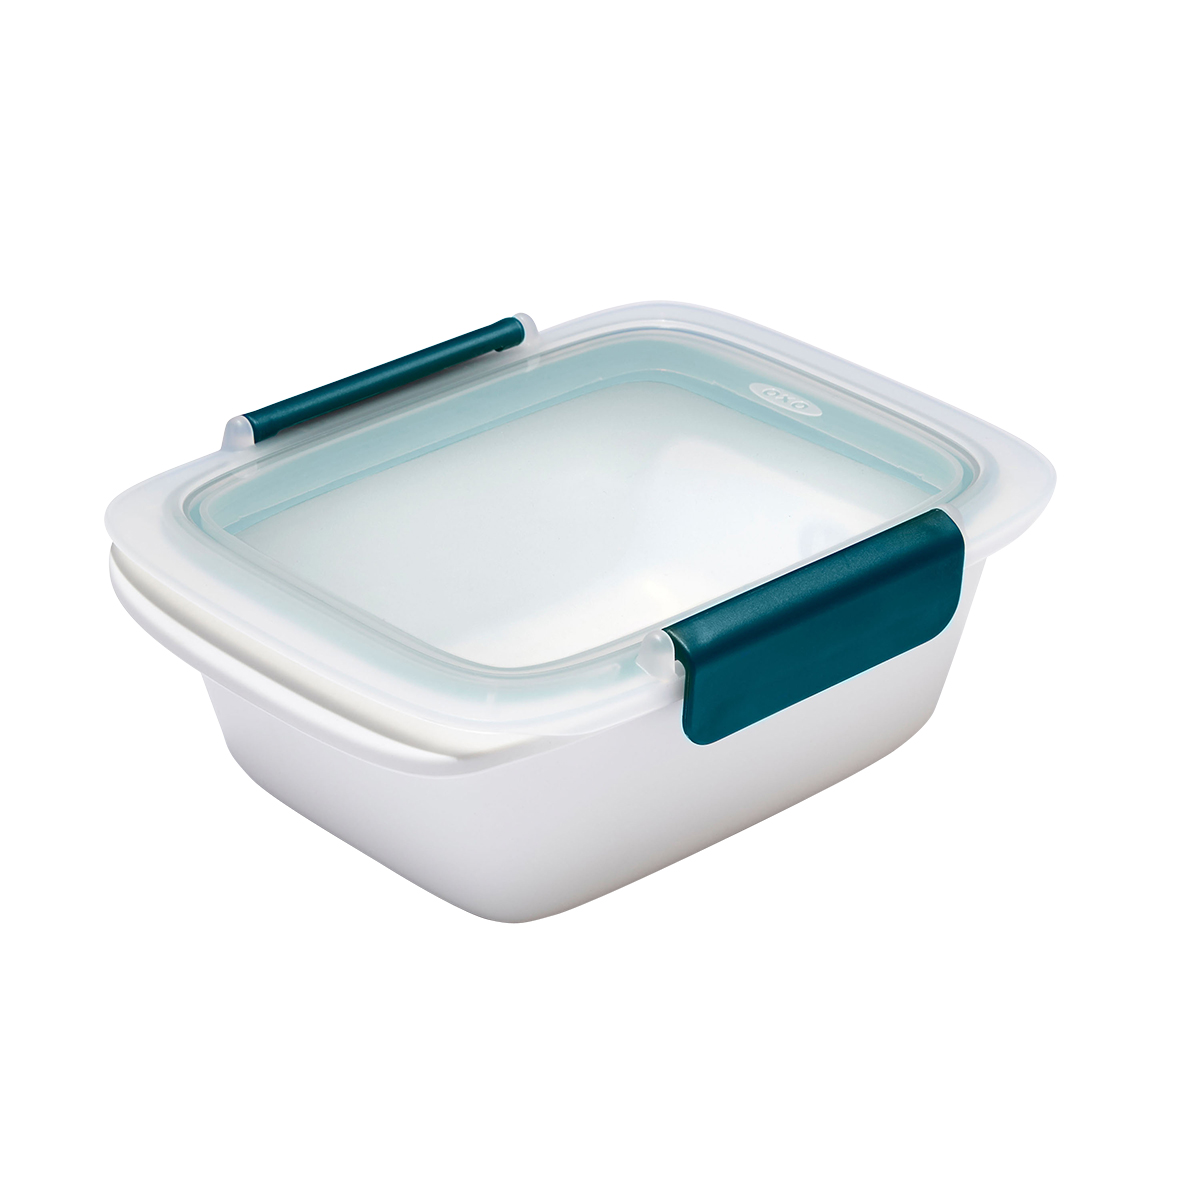 https://www.containerstore.com/catalogimages/423858/10085070-OXO-GripGo-VEN2.jpg